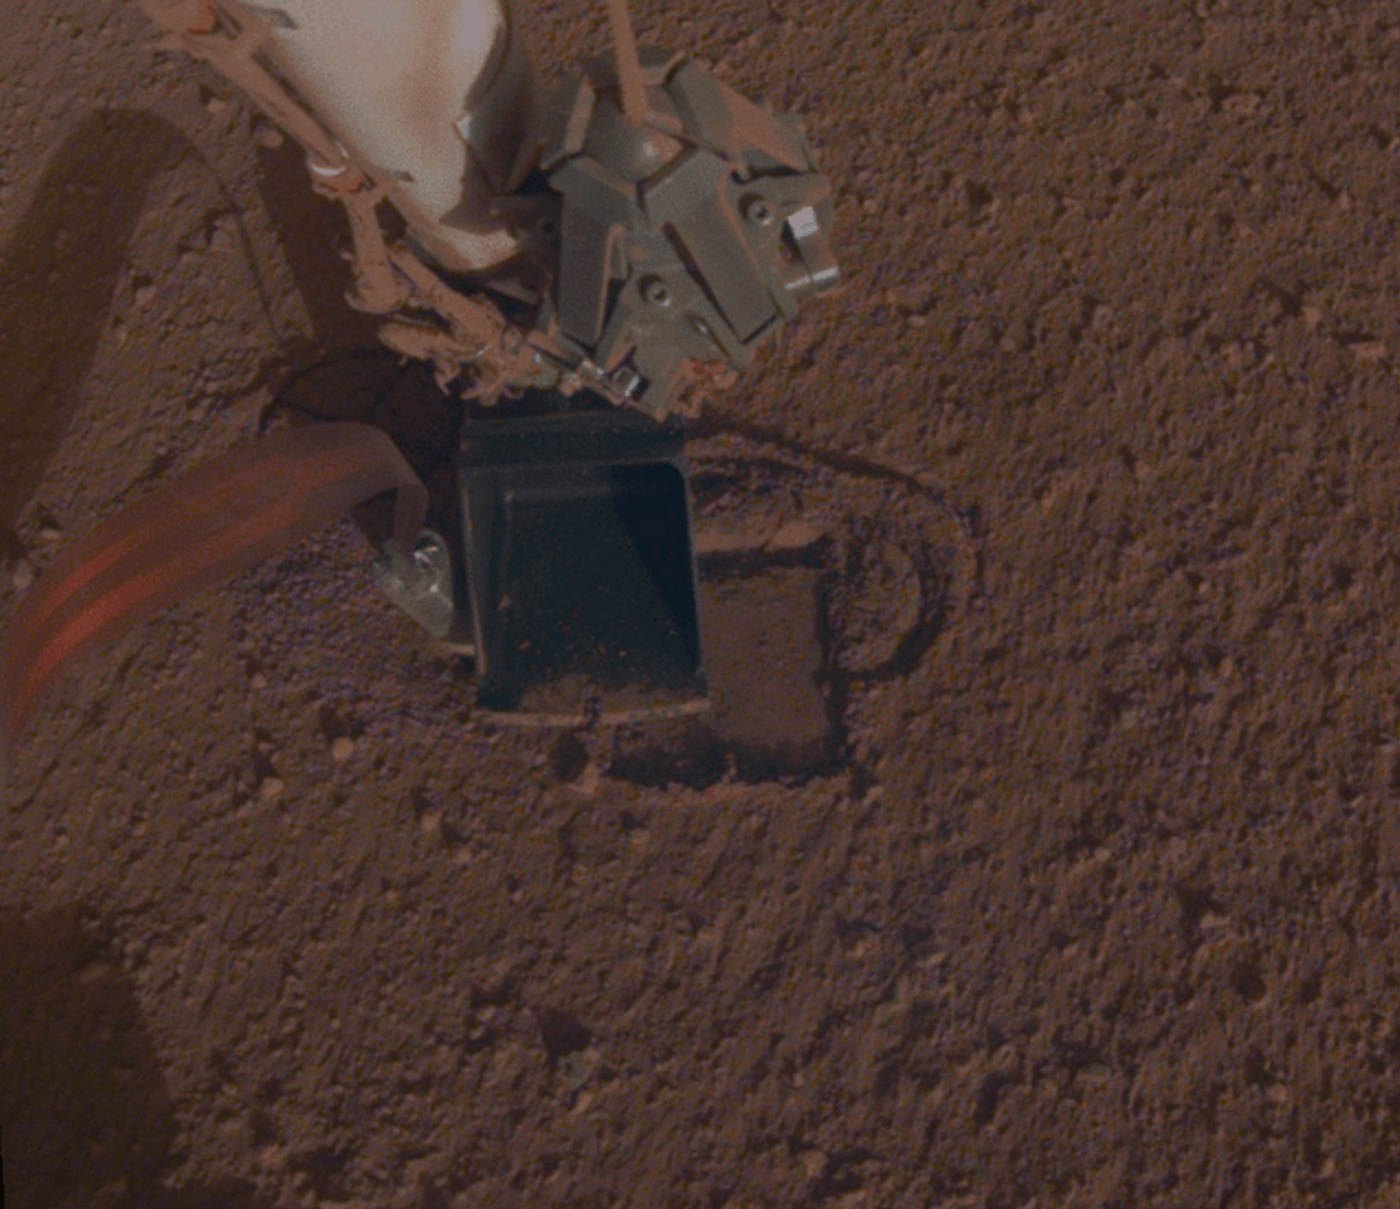 InSight's Mole has successfully dug another two centimeters this week with the help of the lander's robotic arm.